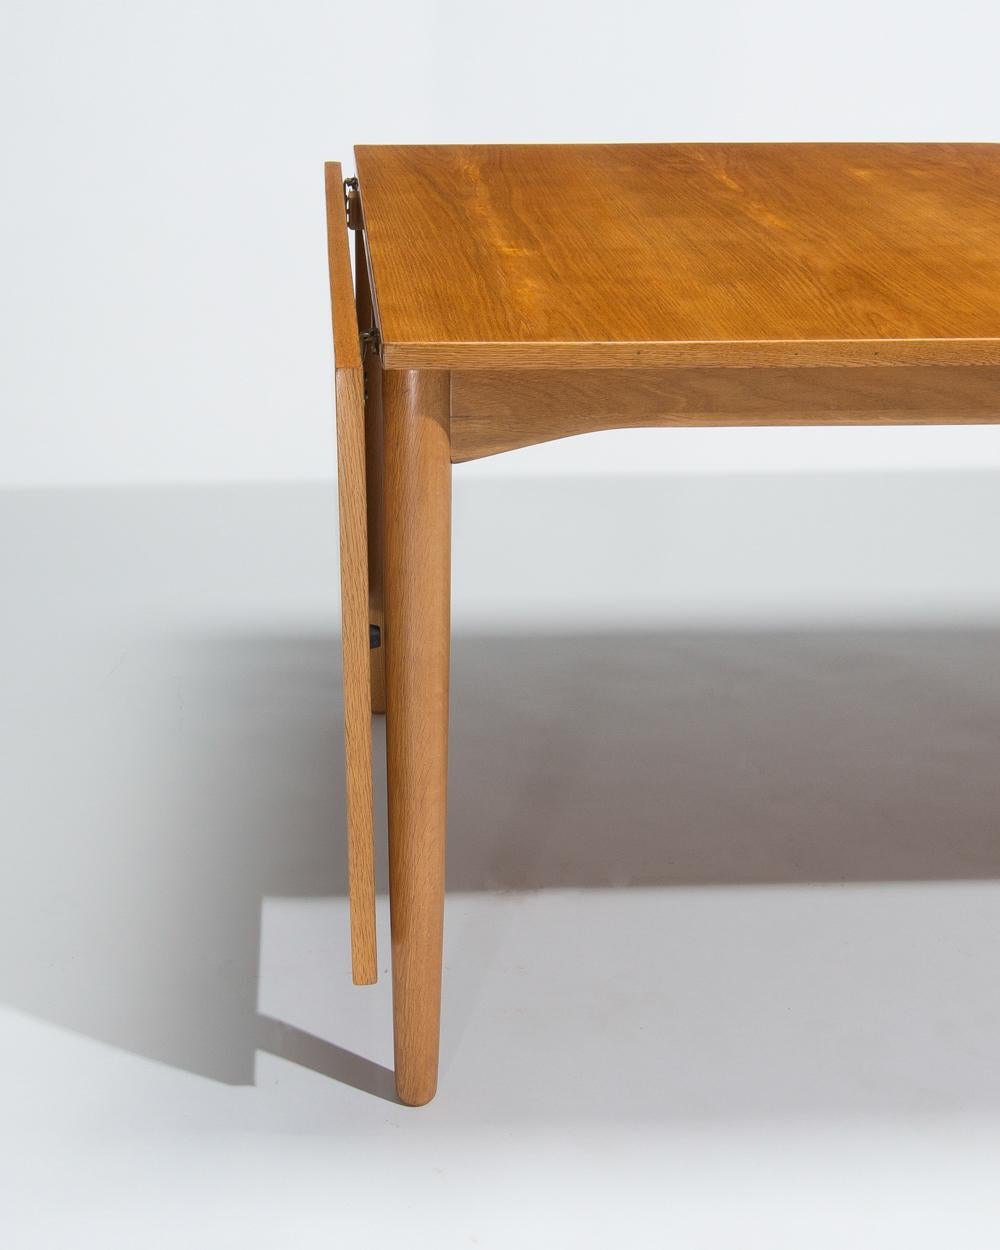 20th Century Mid Century Danish Dining Table In Oak By Borge Mogensen, 1960’s For Sale